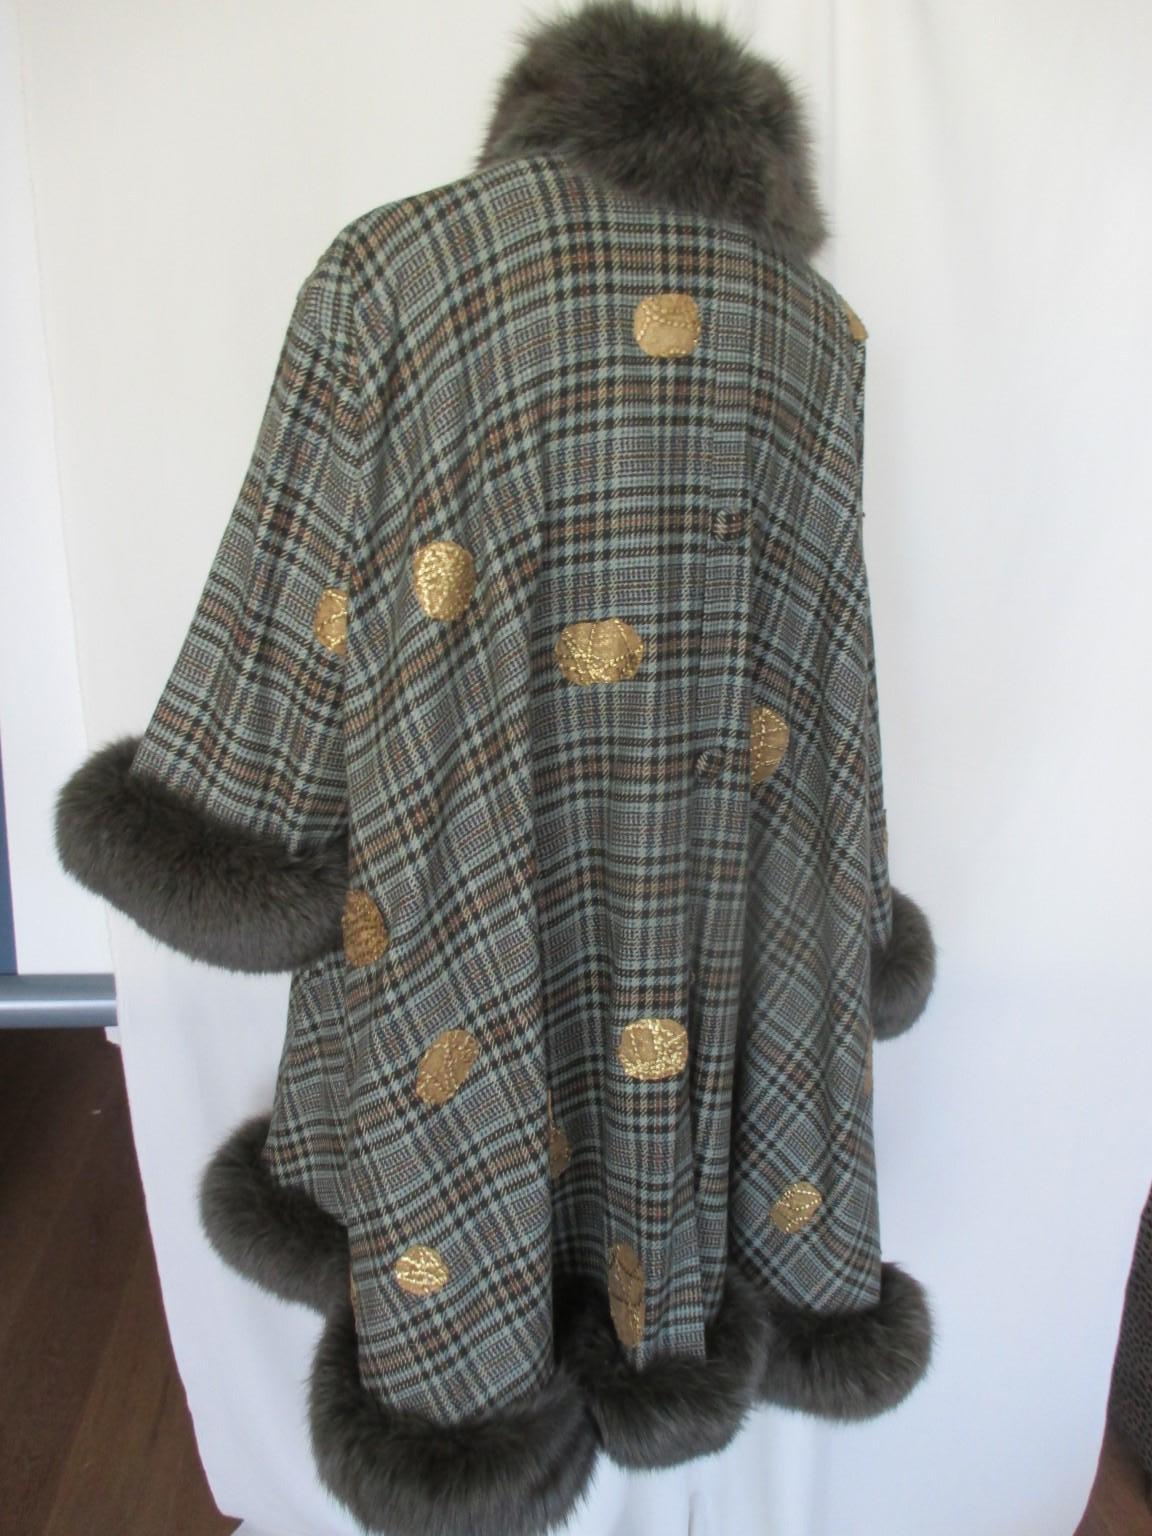 This cape style coat made from green checked wool and hand artist designed with gold fabrics.

 We offer more luxury fur items, view our frontstore.

Details:
Color: Green
Trimmed with dyed fox fur
With sleeves
2 pockets
Split (half closed) at the